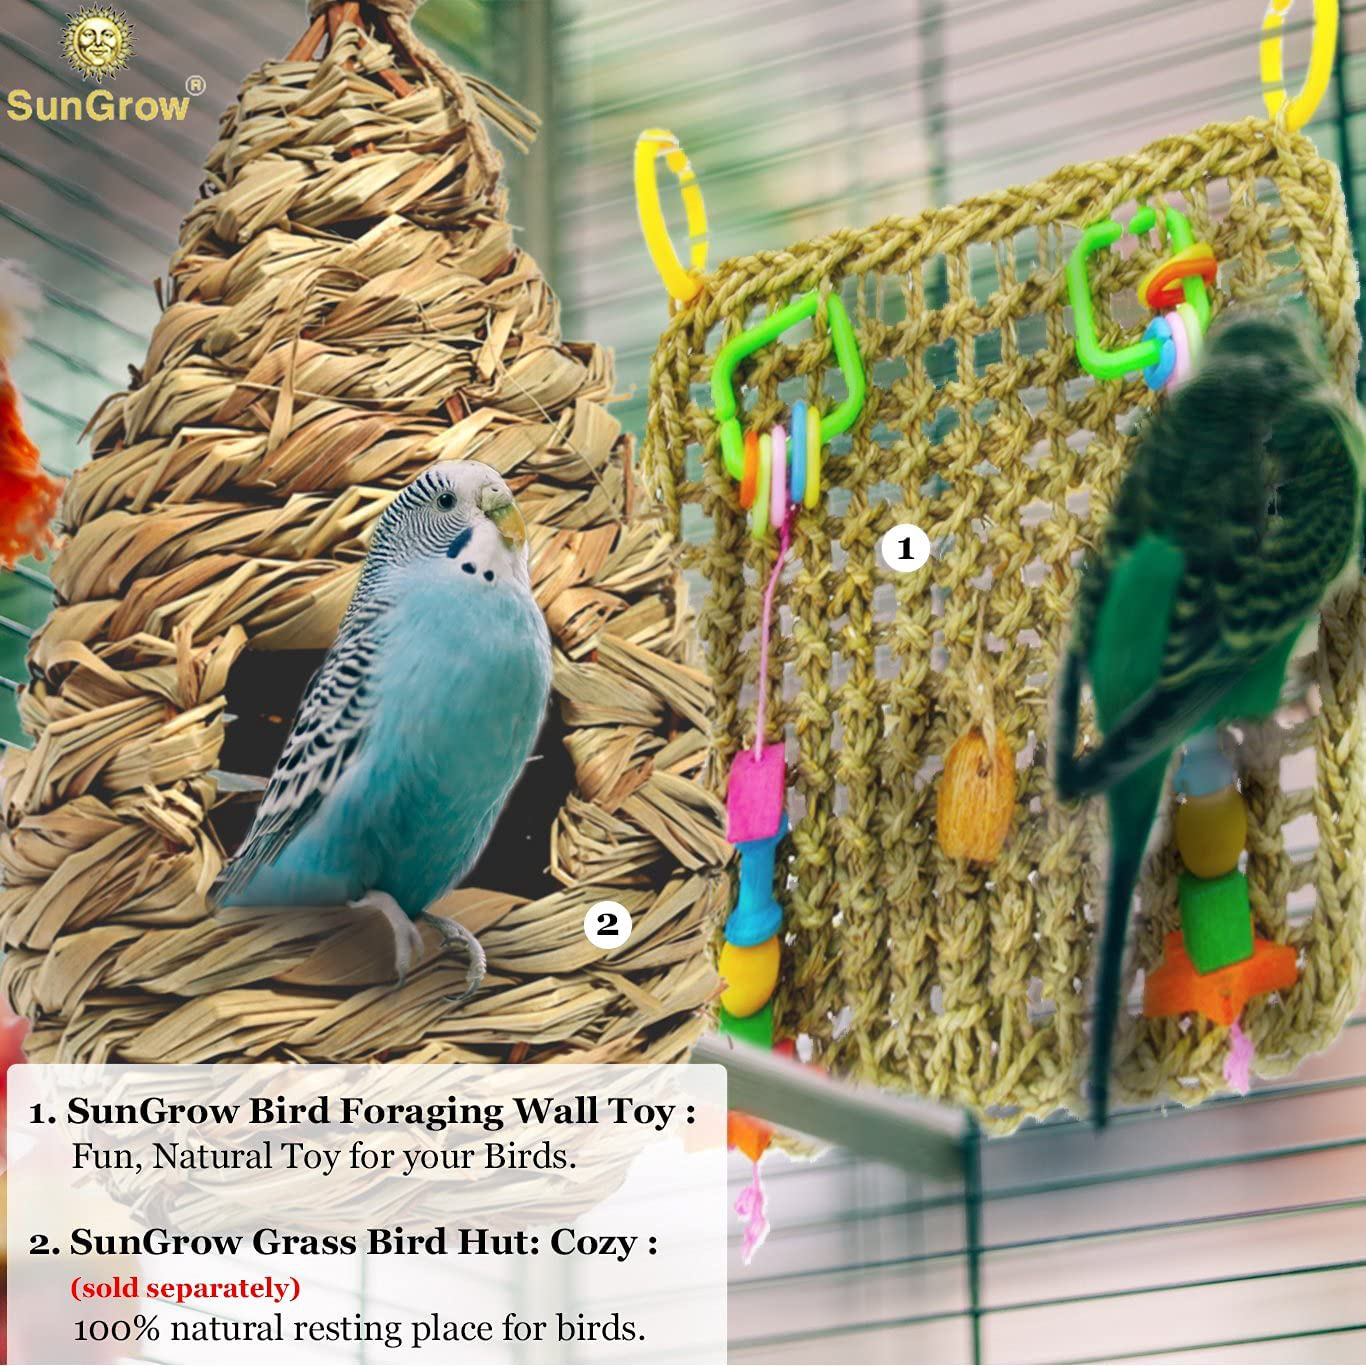 amazing pet products: Grass Bird Hut - Cozy Resting Place for